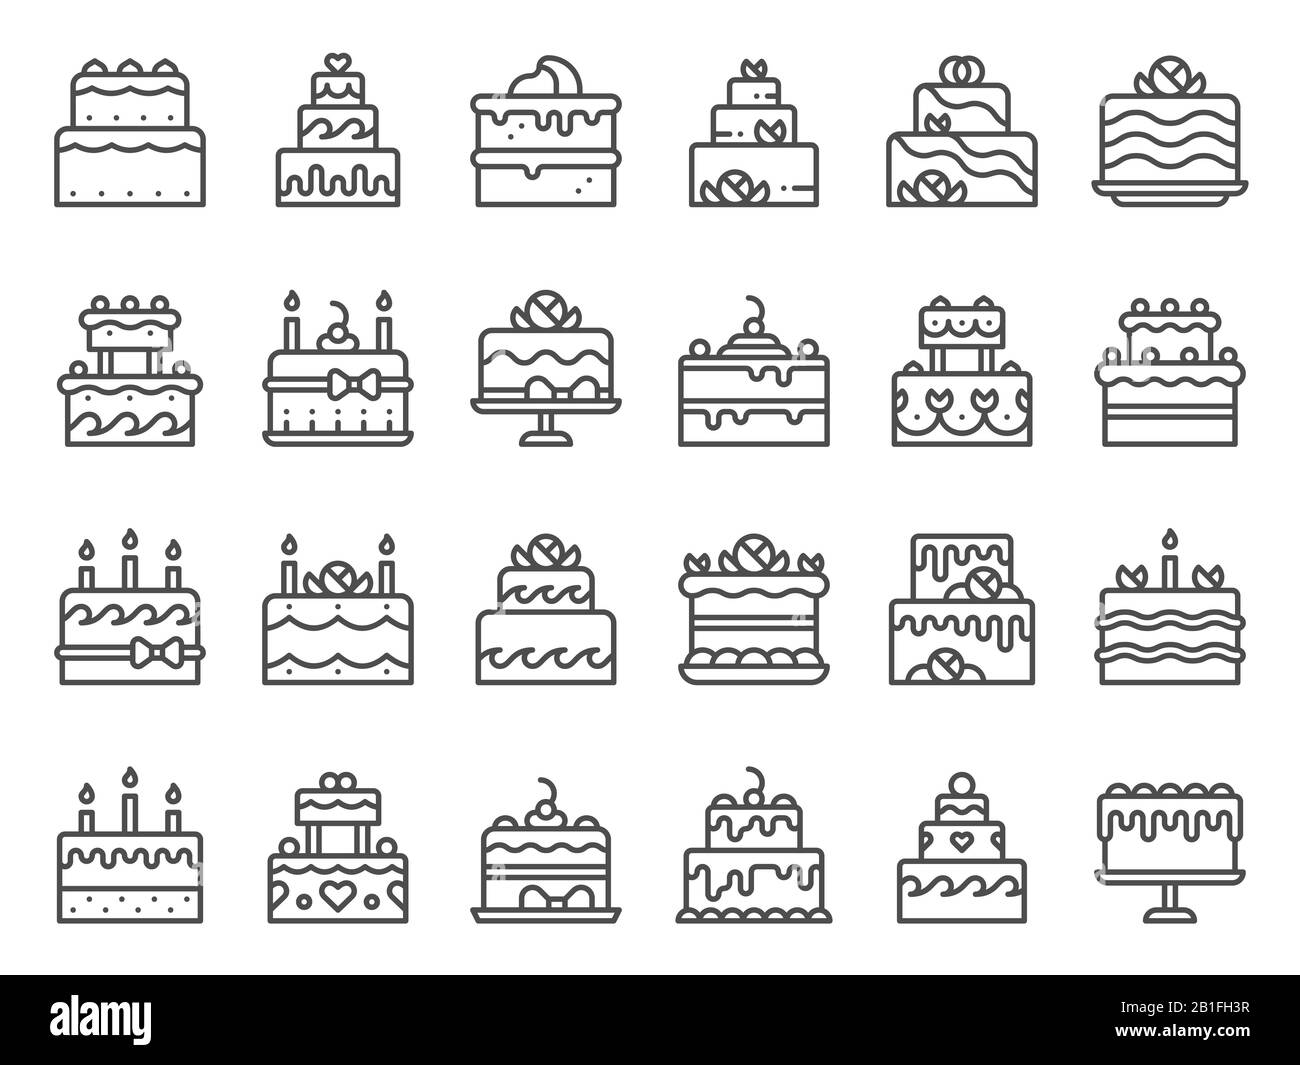 Outline cake icons. Sweet cupcake, homemade dessert with candles and bakery delicious cakes line art vector icon set Stock Vector